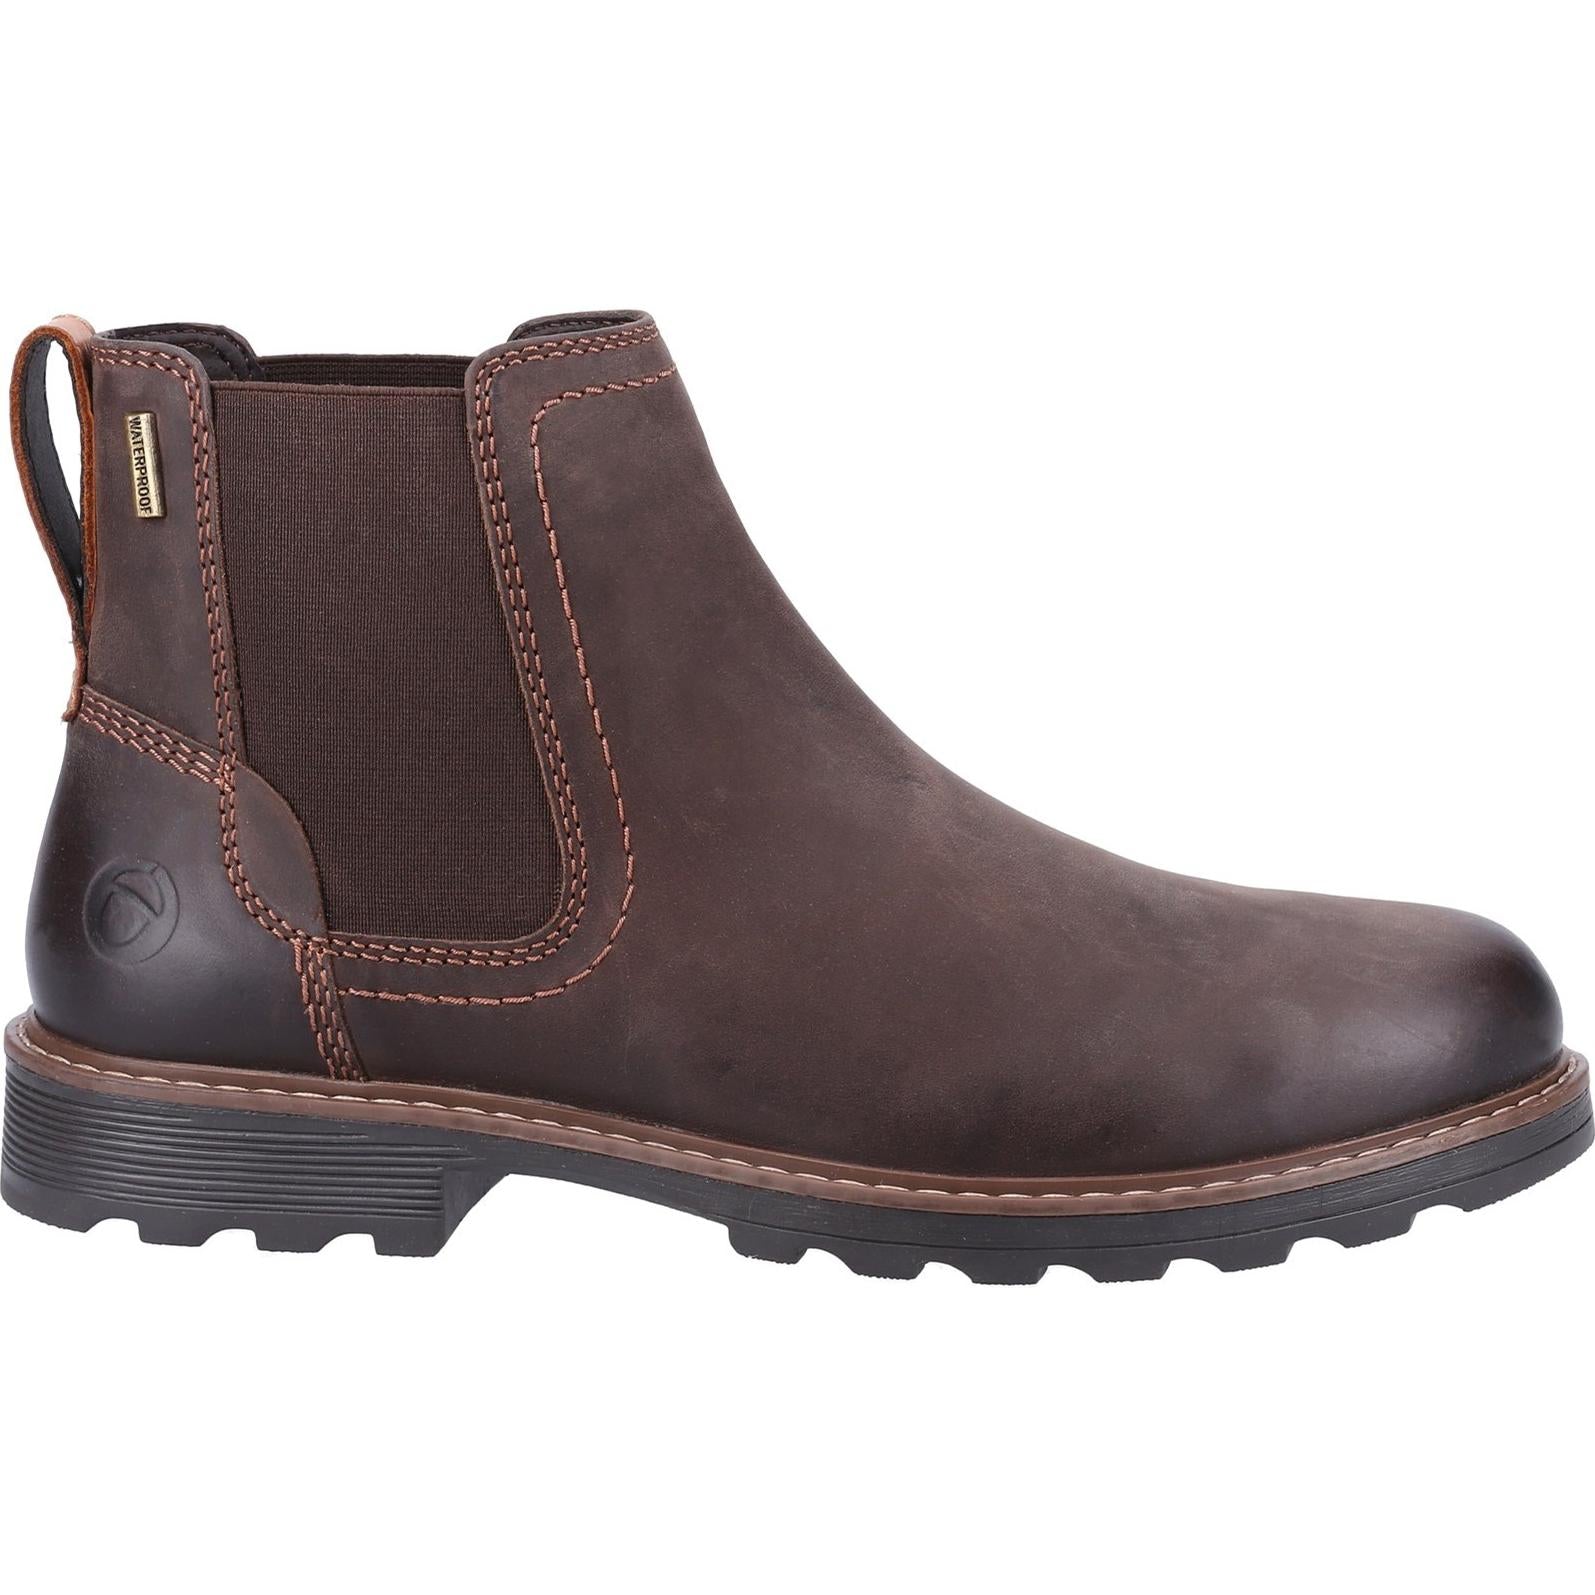 Cotswold Nibley Boots